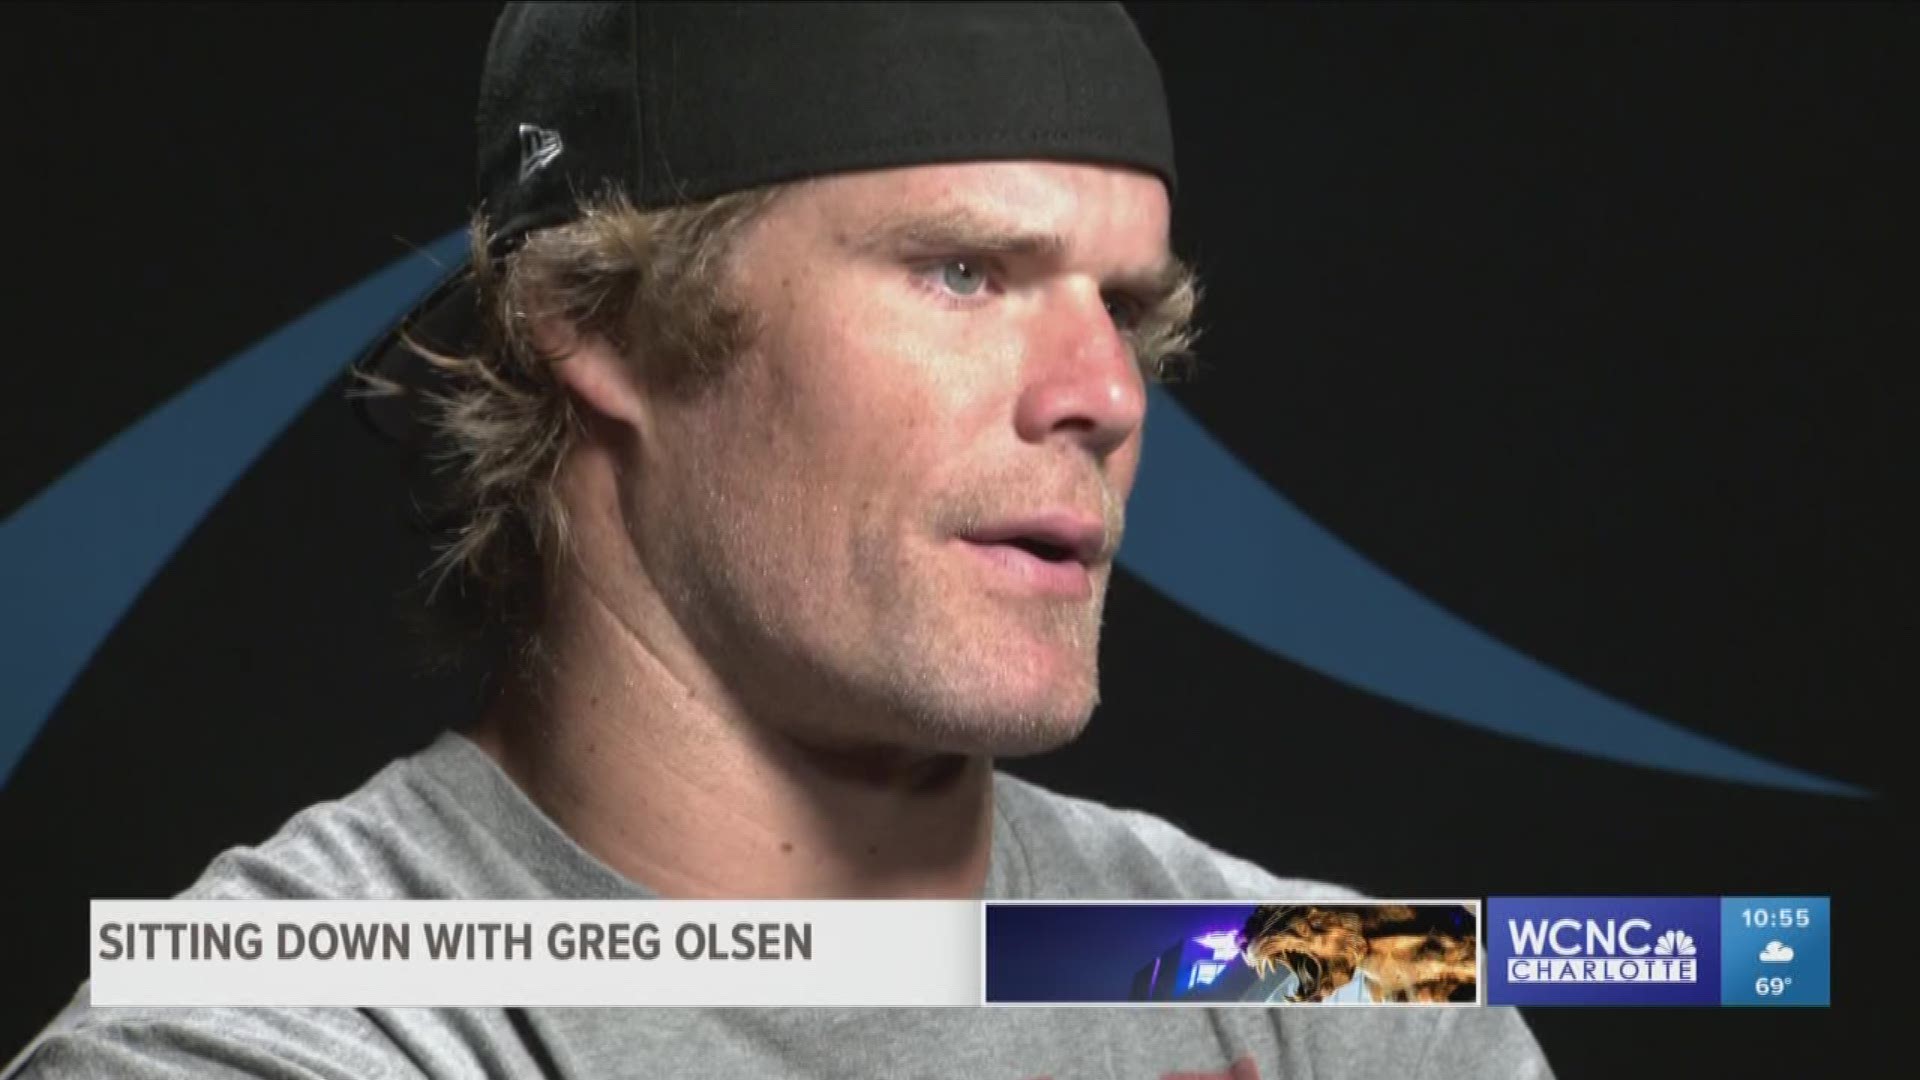 In a season of change, one constant for the Panthers is Pro Bowl tight end Greg Olsen. After battling injuries last year, the veteran is ready to prove he can still play at an elite level.